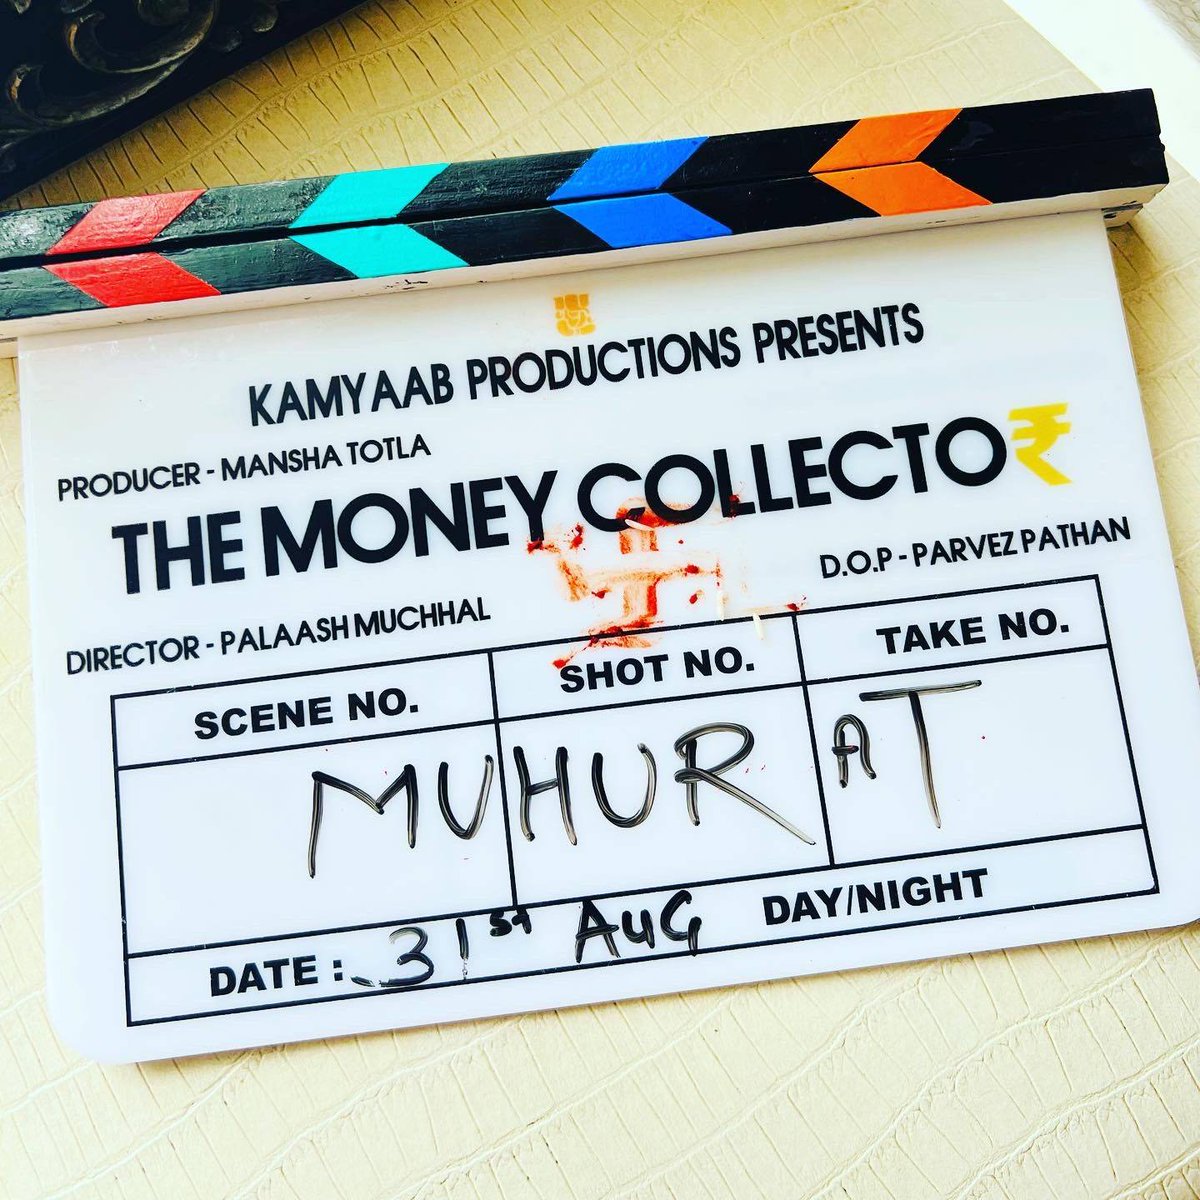 After #Ardh, music composer - director #PalaashMuchhal's next directorial film is titled #TheMoneyCollector. 2022 release in cinemas, produced by #ManshaTotla [#KamyaabProductions]. #ParvezPathan is the DoP.